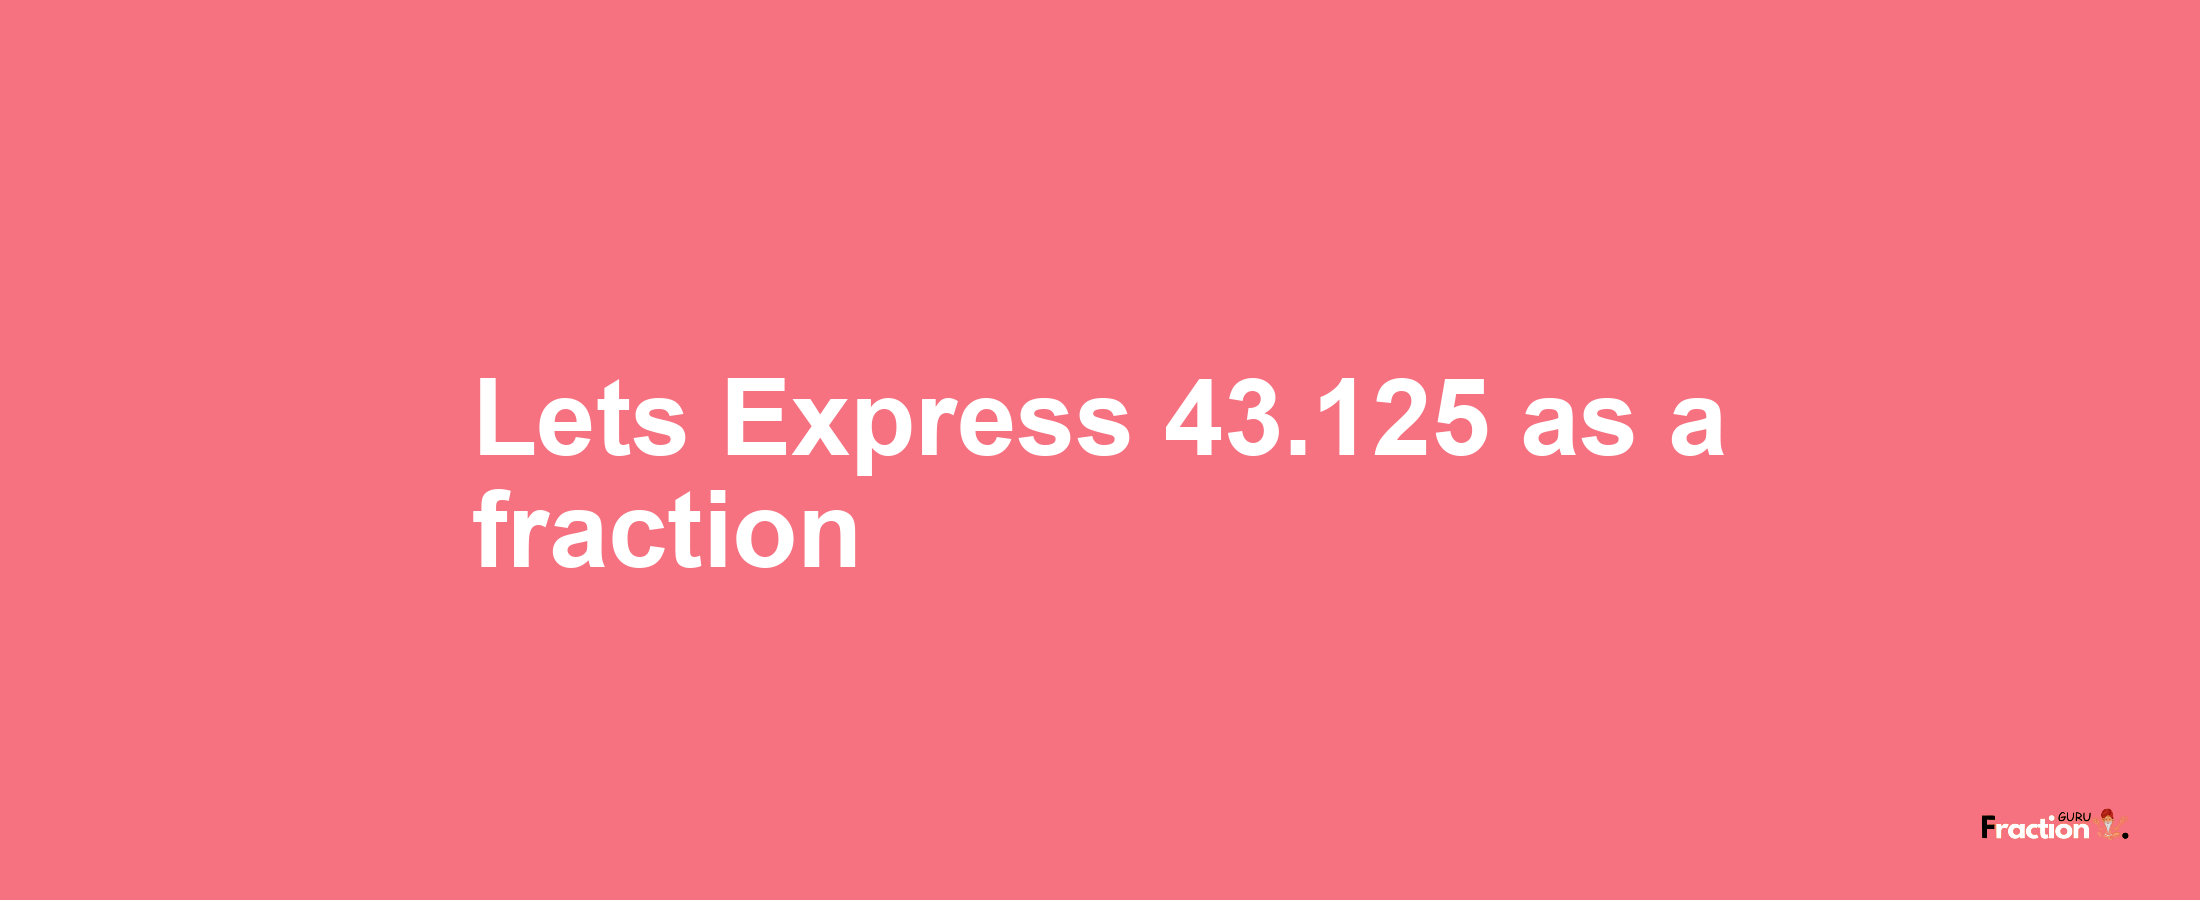 Lets Express 43.125 as afraction